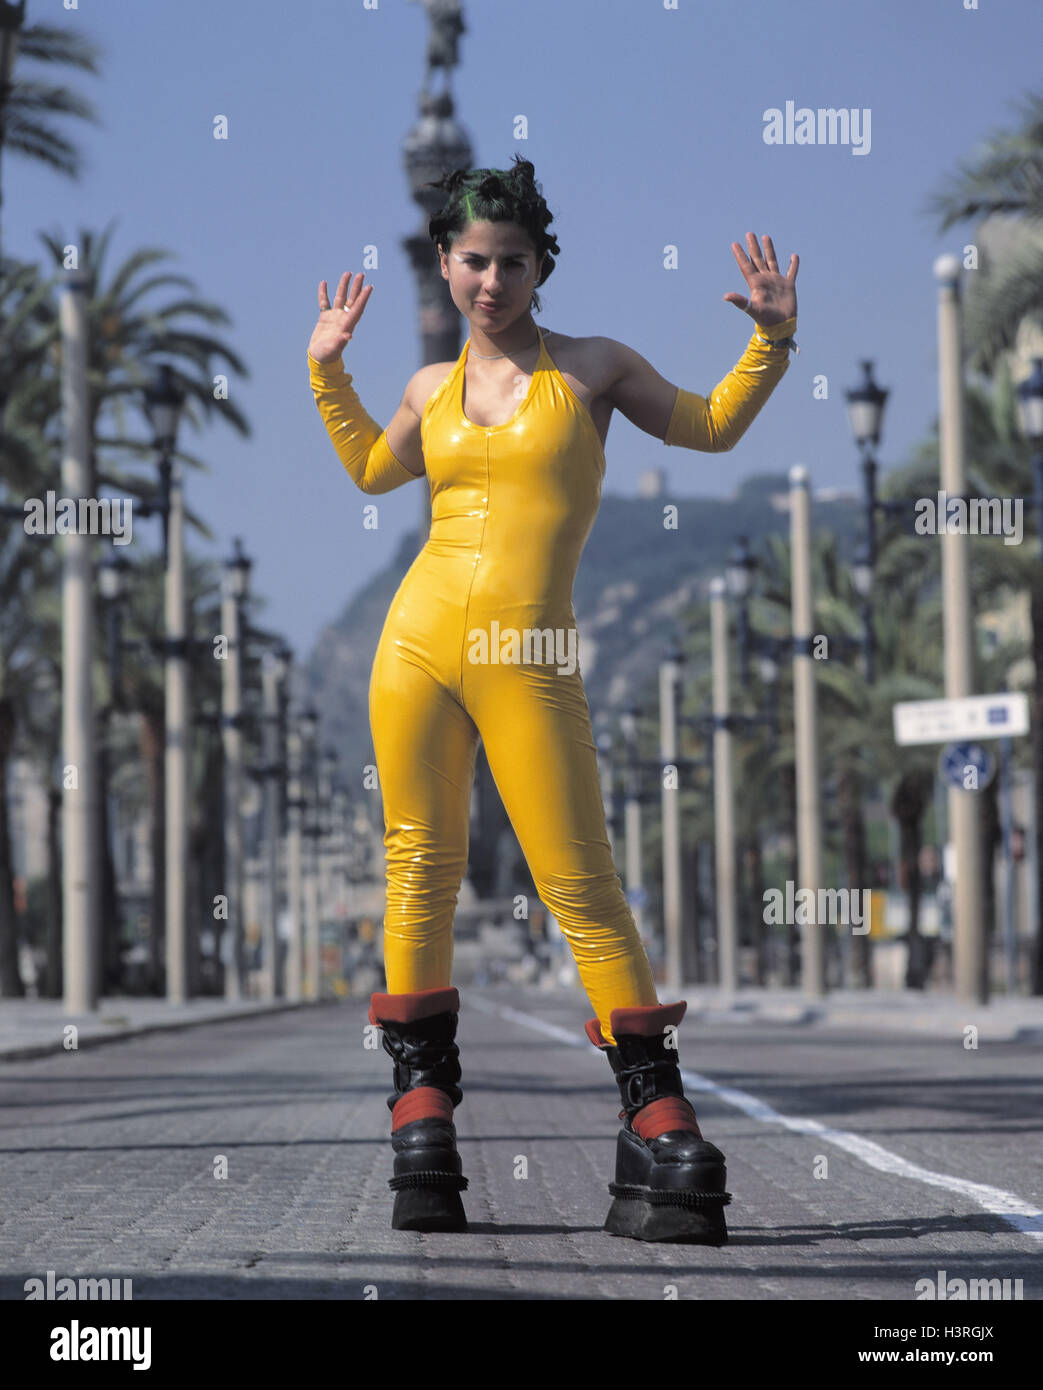 Spain, Barcelona, woman, young, latex suit, plateau shoes techno, provocation, provoke, life-style, setting, self-confidently, unconventionally, lifestyle, whole gesture Stock Photo - Alamy